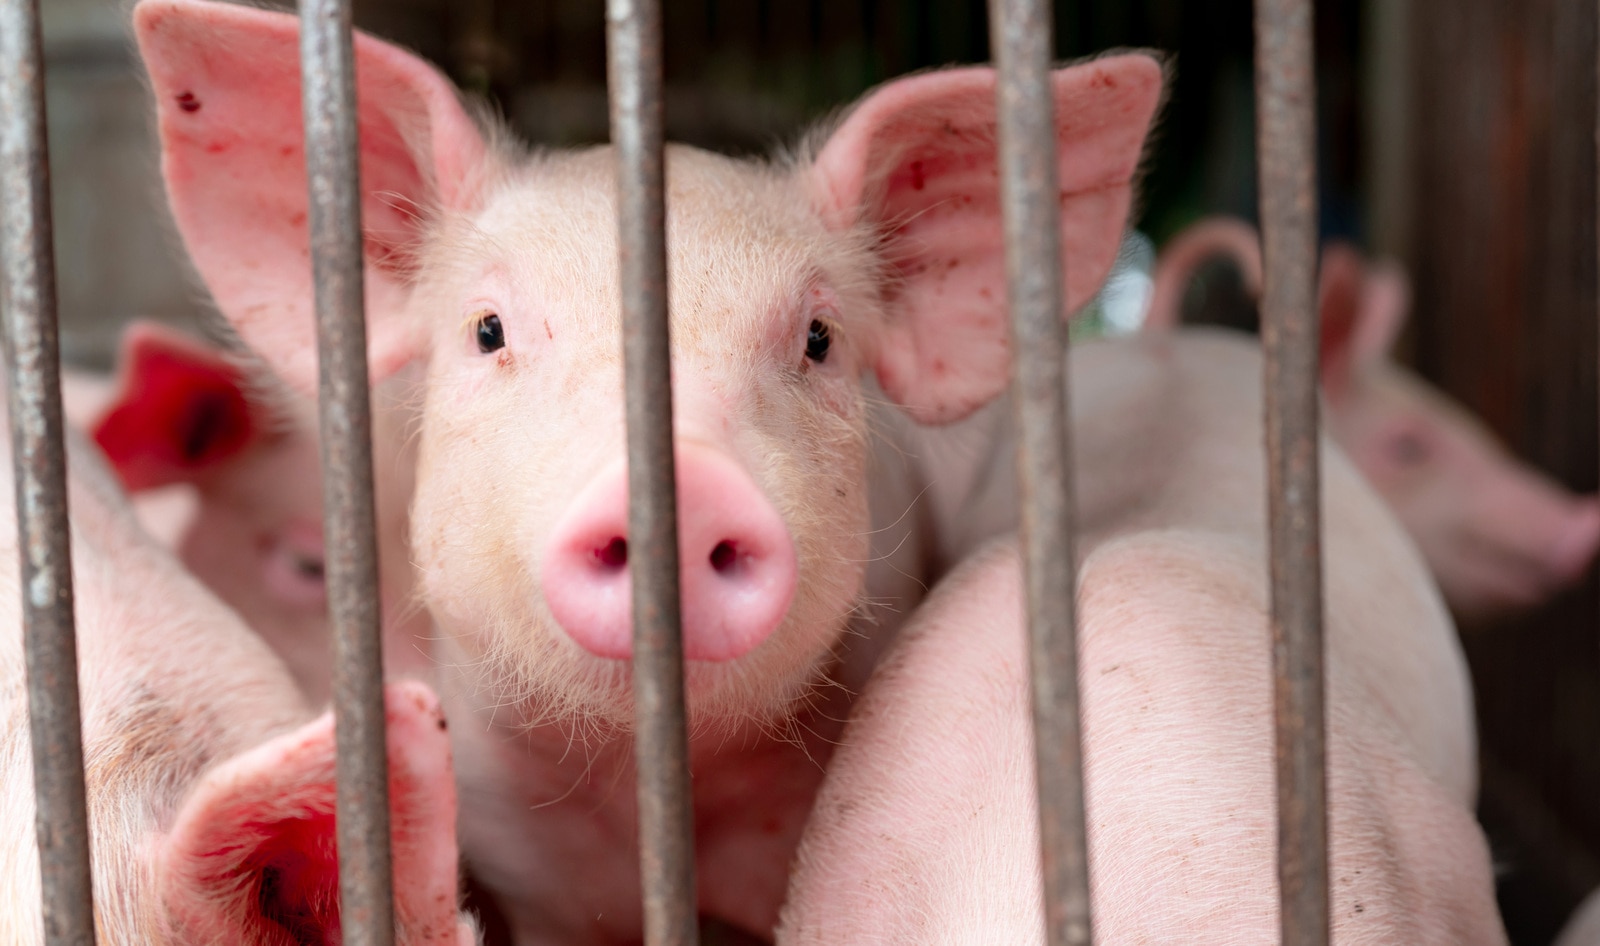 New Flu Strain With Pandemic Potential Found on Pig Farms in China